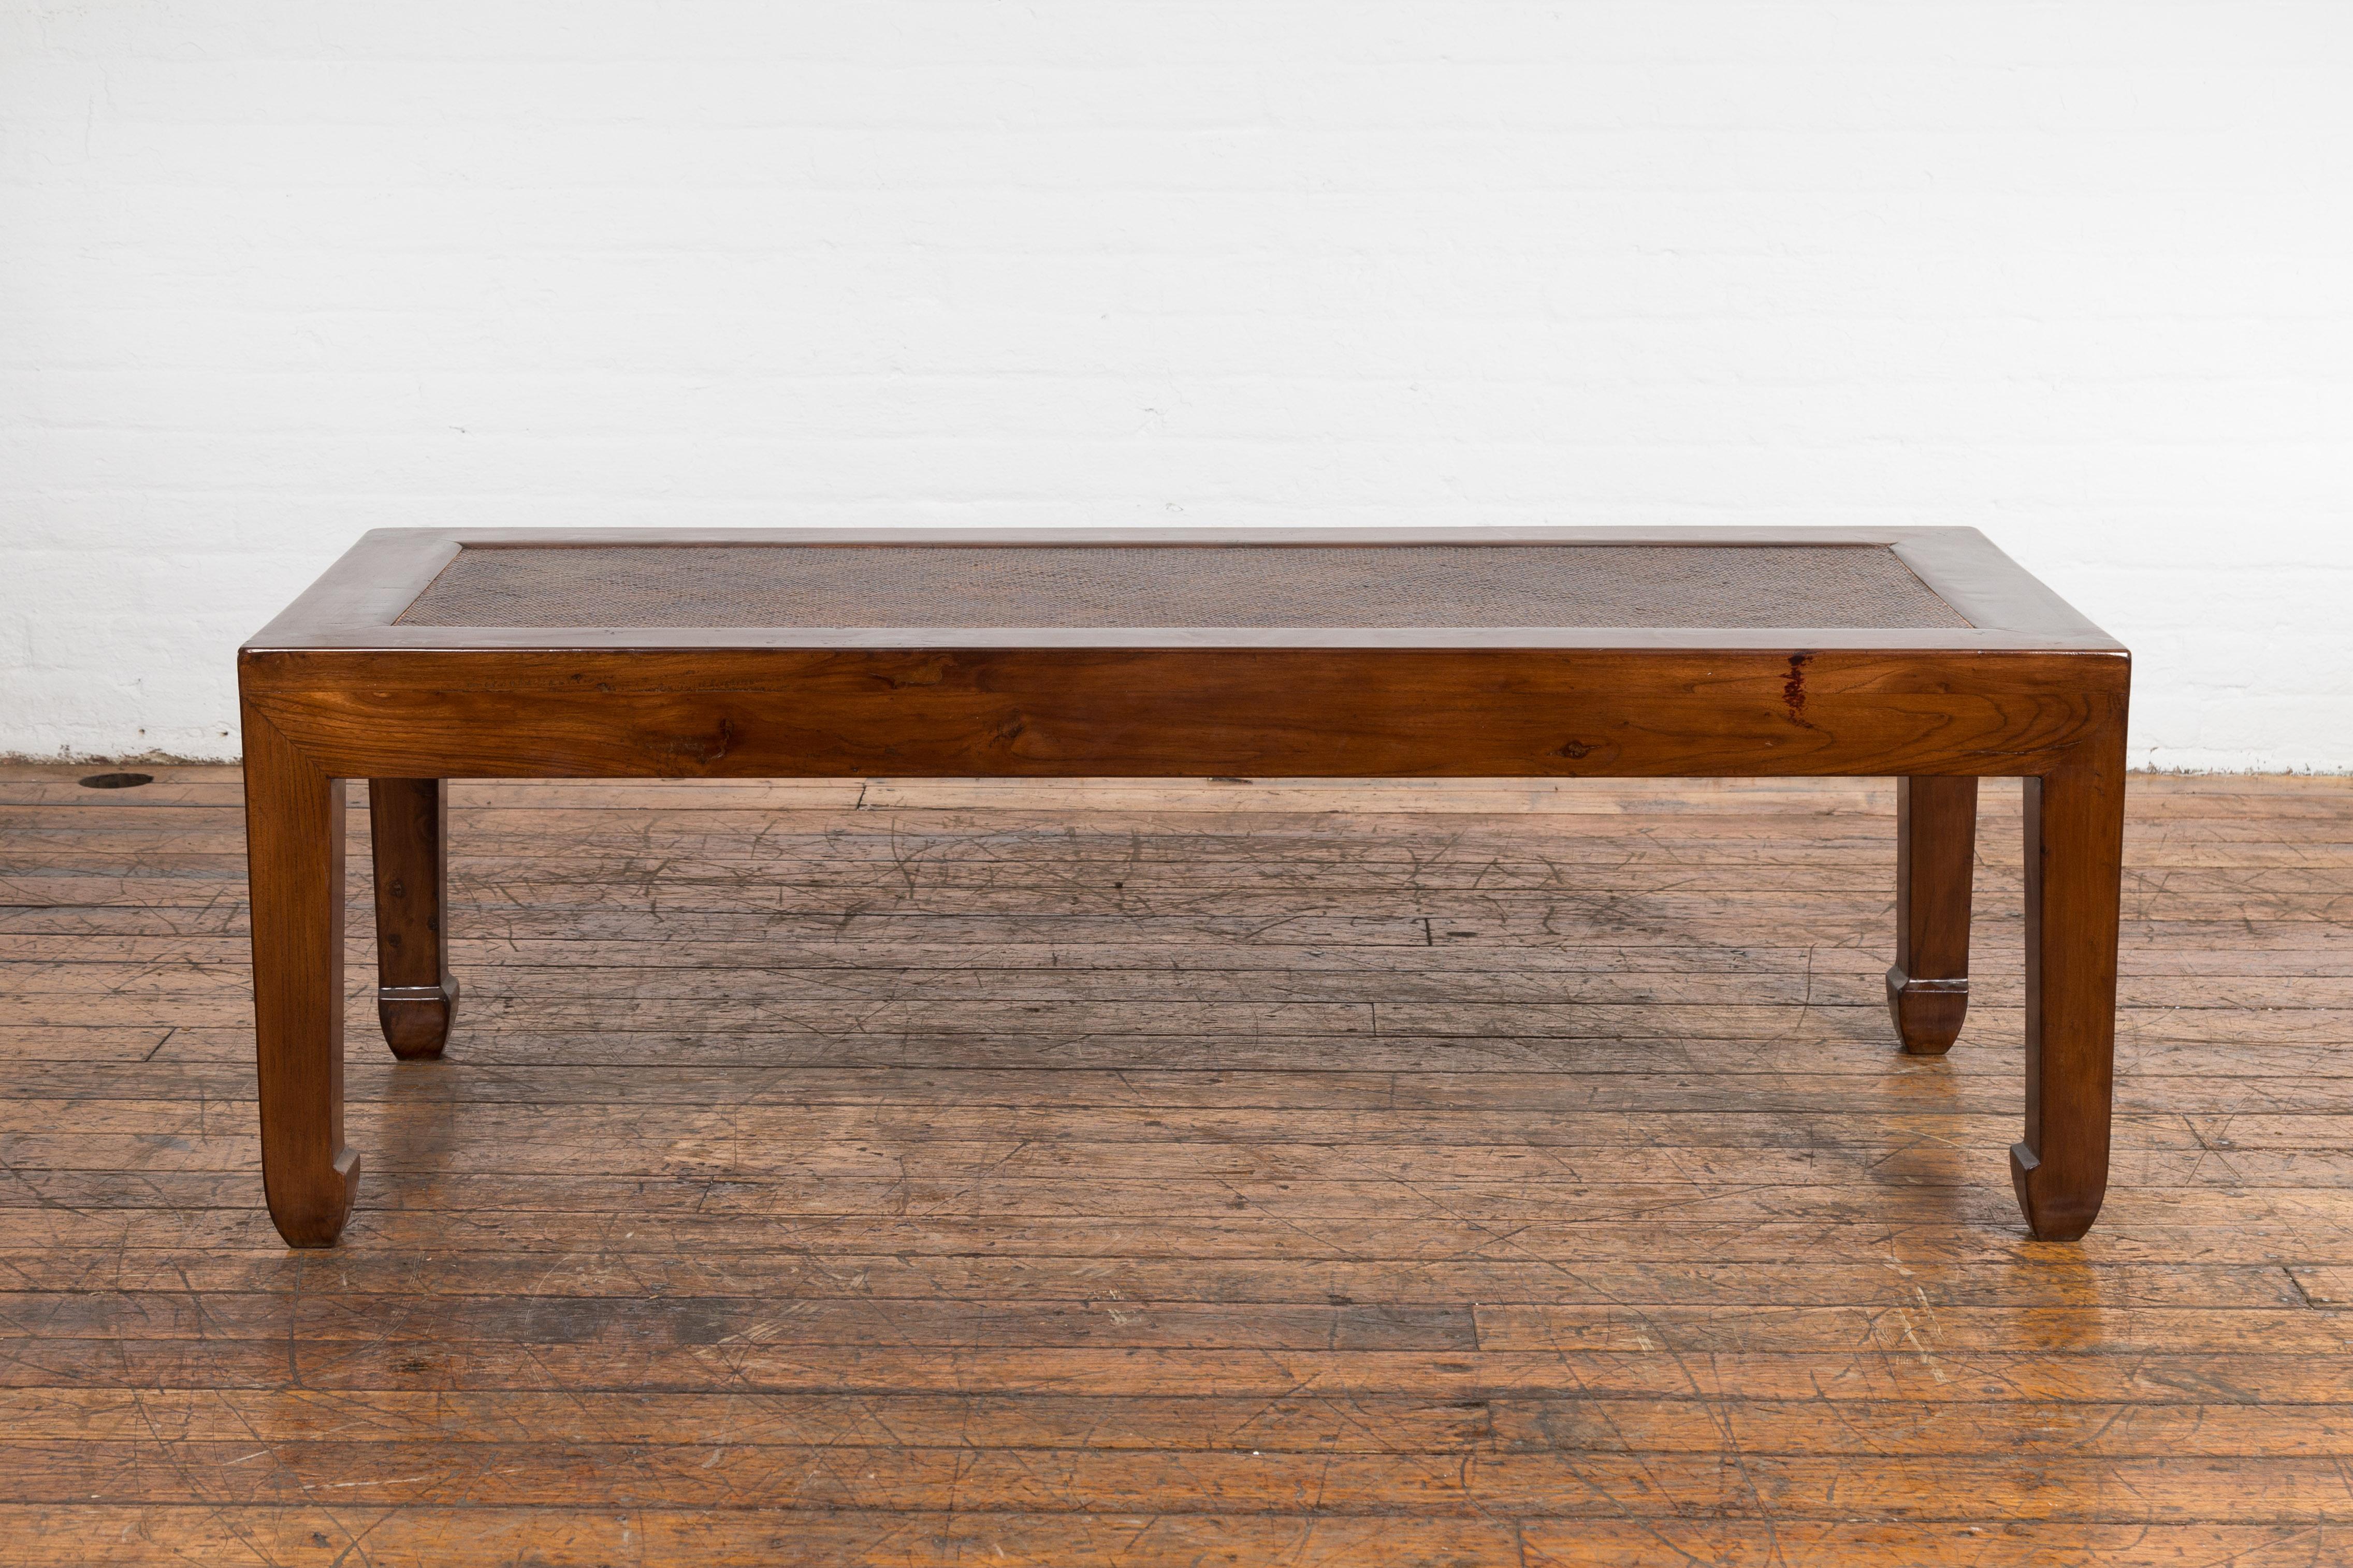 A Chinese late Qing Dynasty period low Kang coffee table from the early 20th century with inset rattan top and horse hoof feet. Delve into the rich history of Chinese furniture design with this low Kang coffee table from the late Qing Dynasty